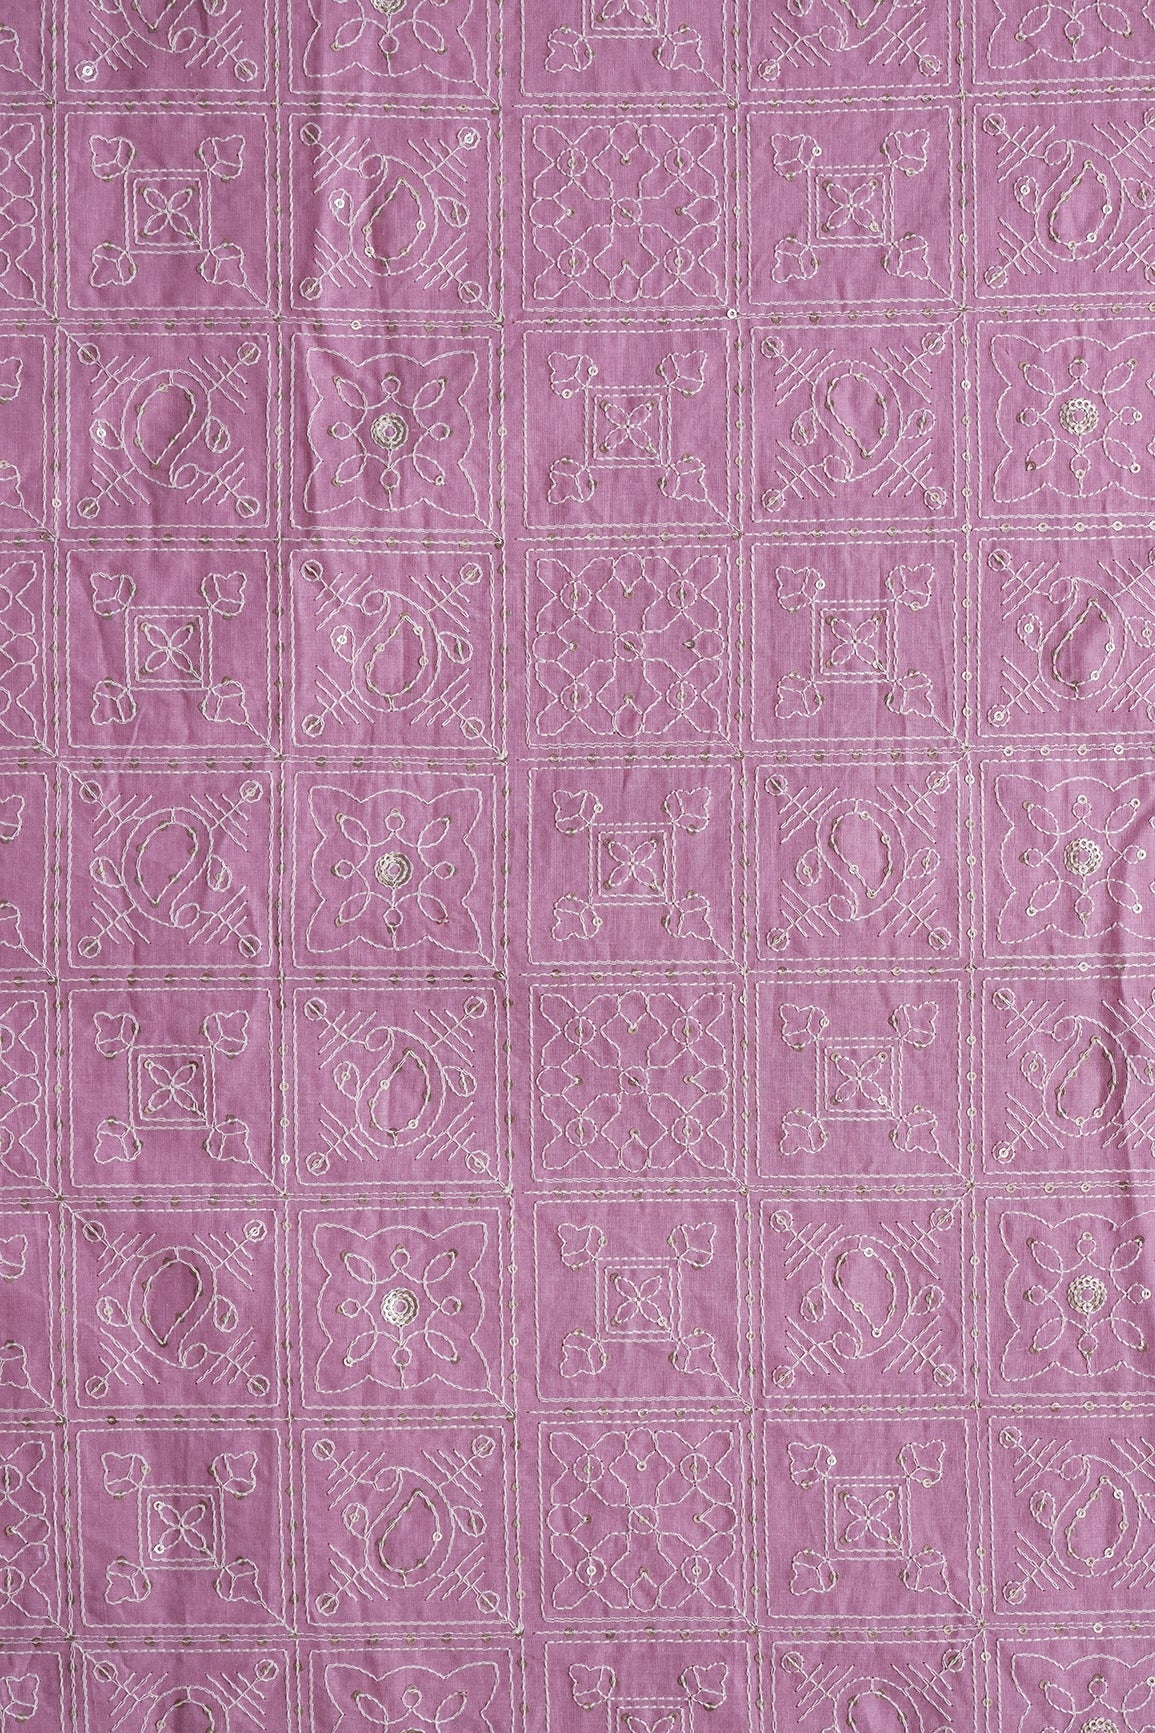 White Thread With Gold Sequins Geometric Embroidery Work On Pink Organic Cotton Fabric - doeraa